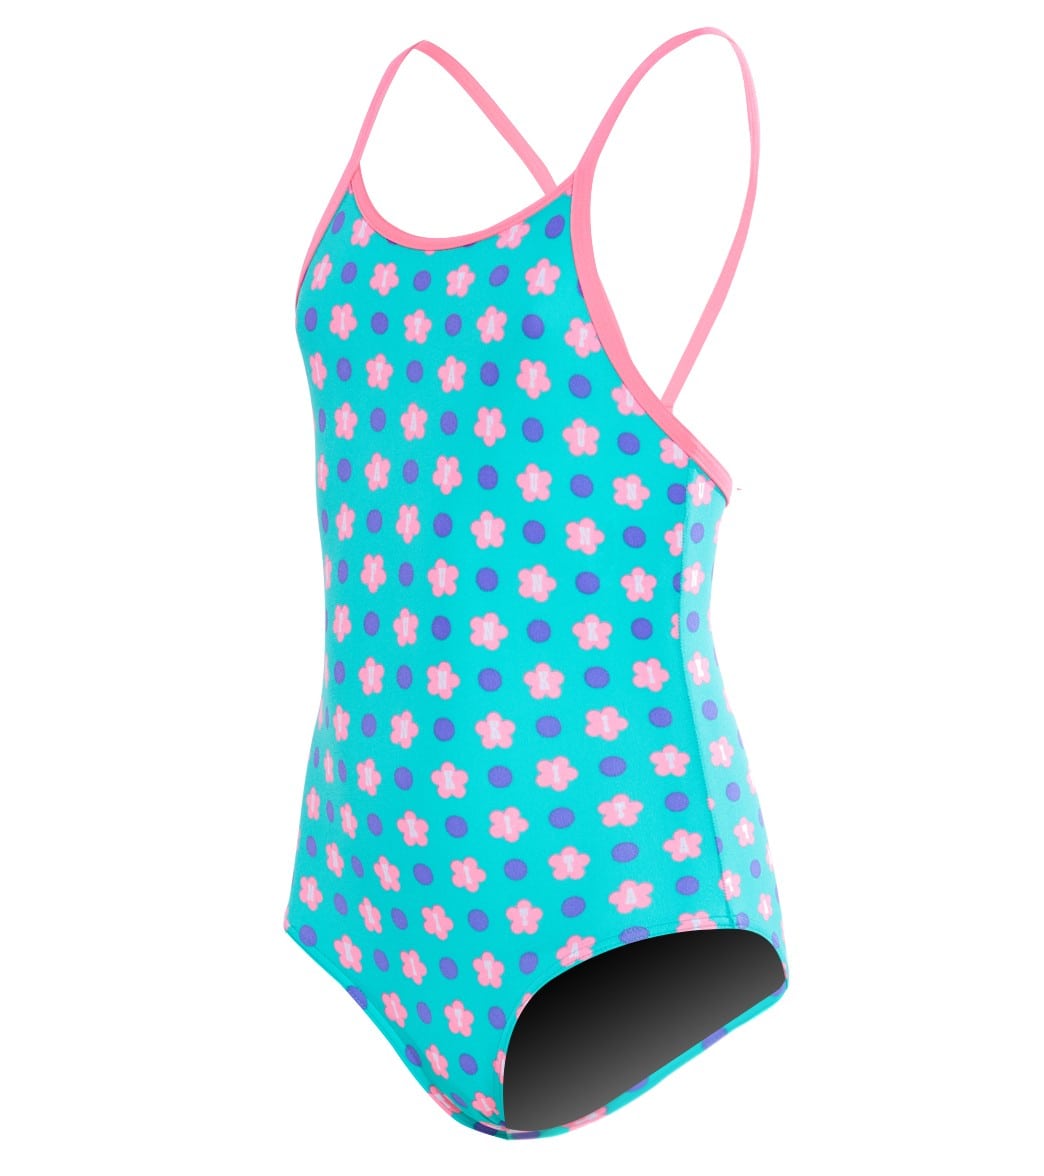 Funkita Toddler Girls' Minty Fresh One Piece Swimsuit - Green/Pink/Purple 1T Polyester - Swimoutlet.com